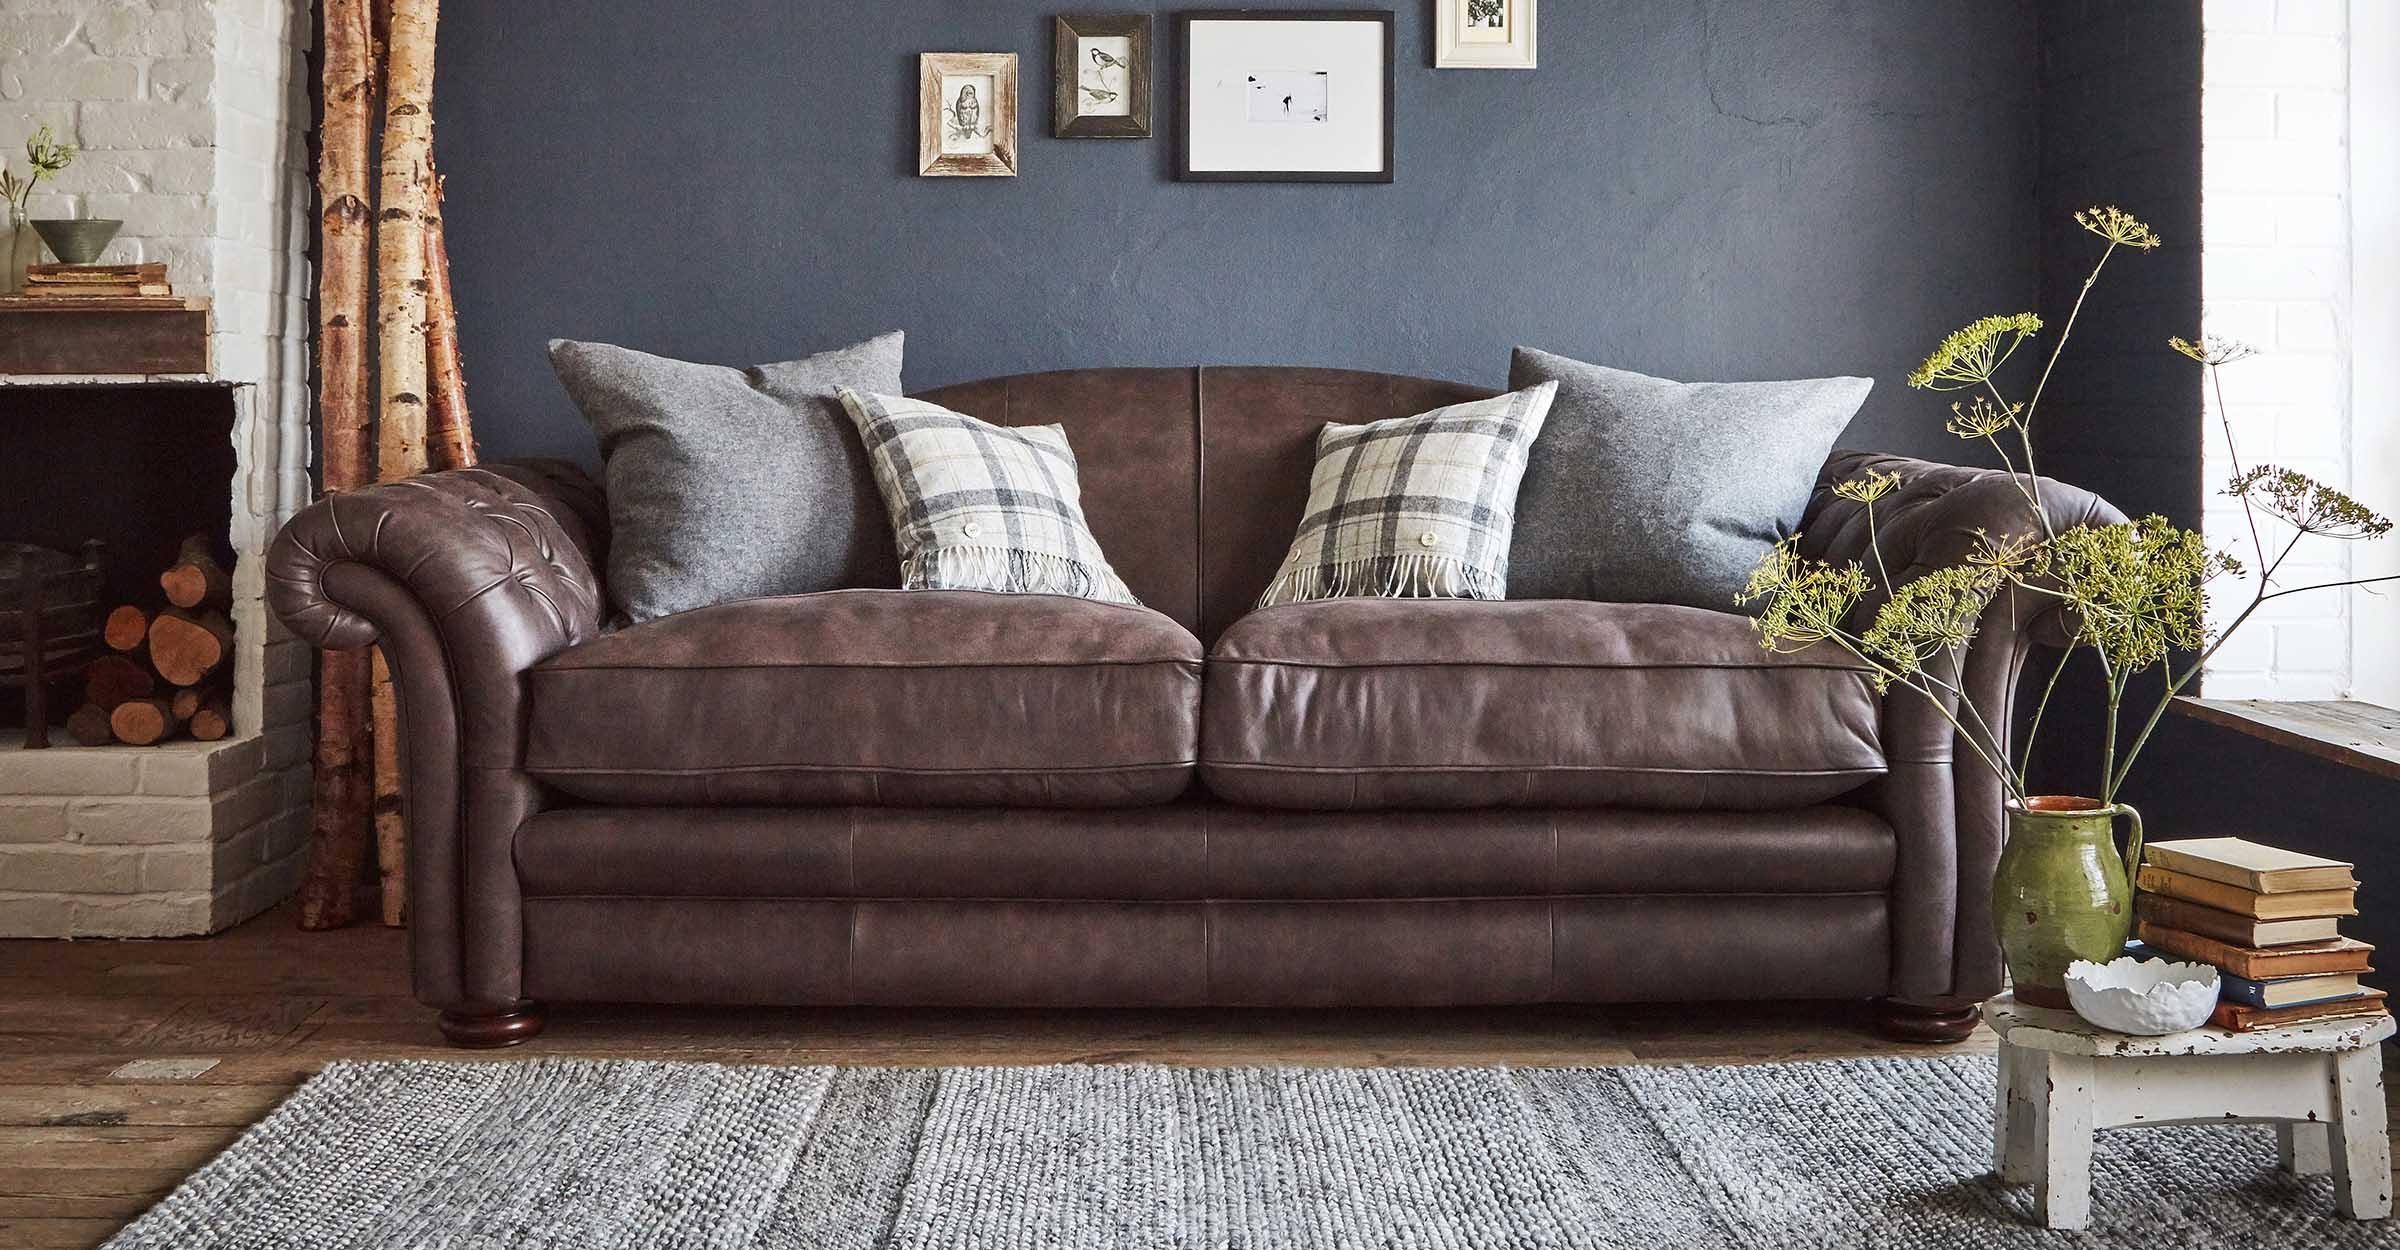 Brown Sofas Dfs, Decor Ideas For Living Room With Brown Leather Furniture